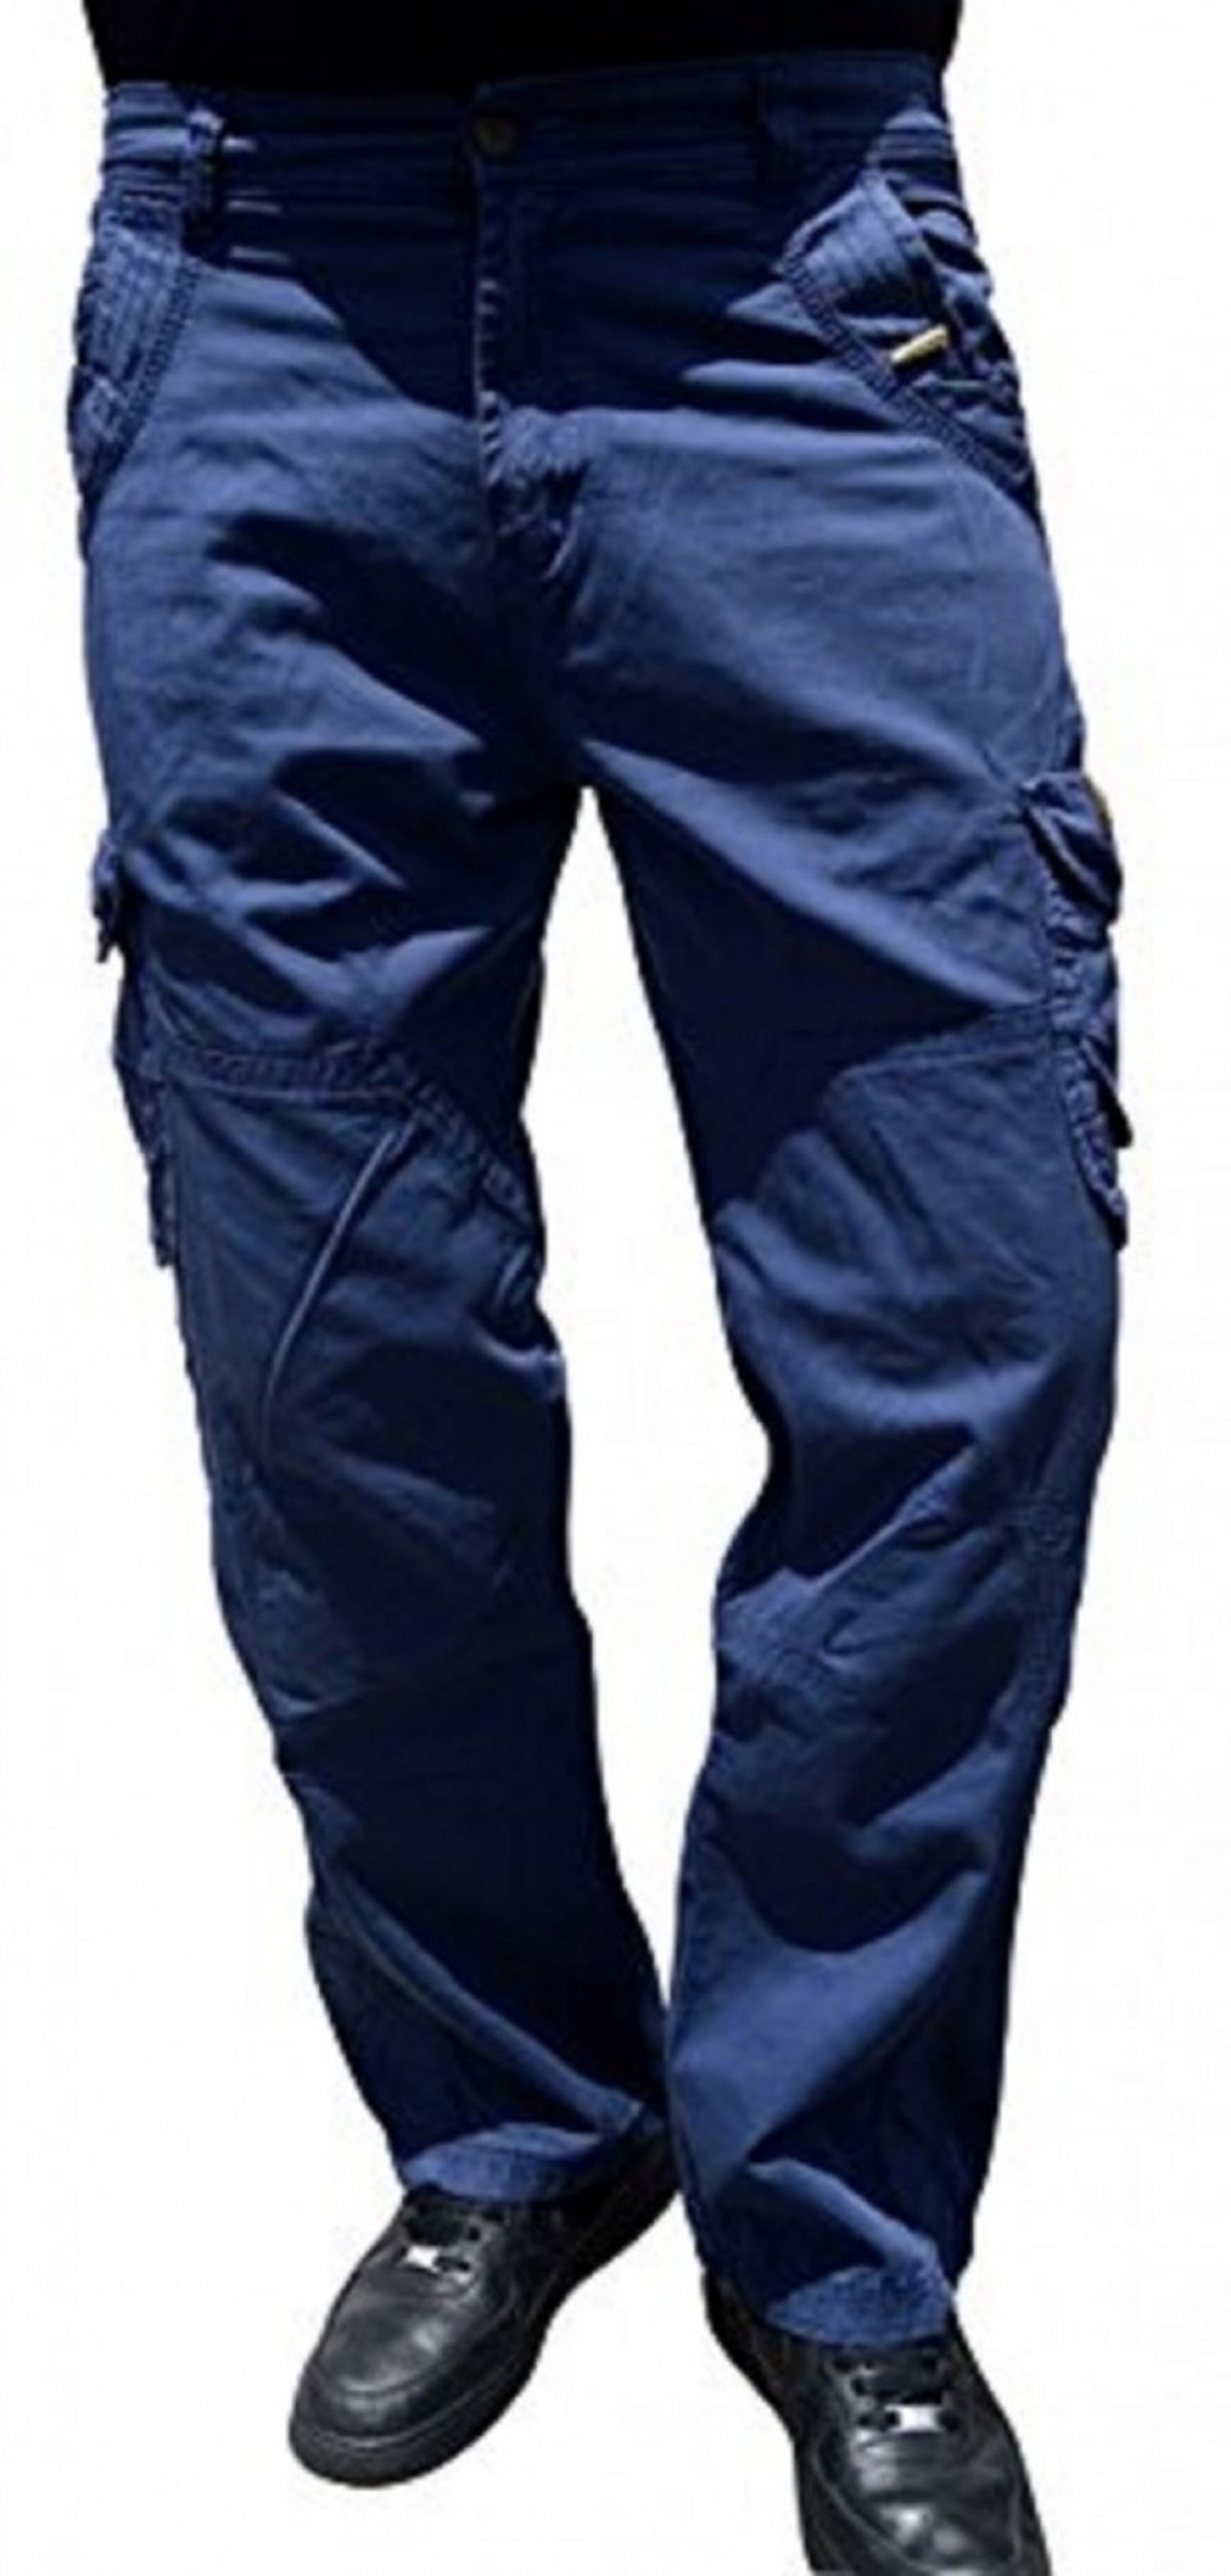 Mens Combat Work Trousers Workwear Pro Cargo Pants Security Army Casual Uniform 